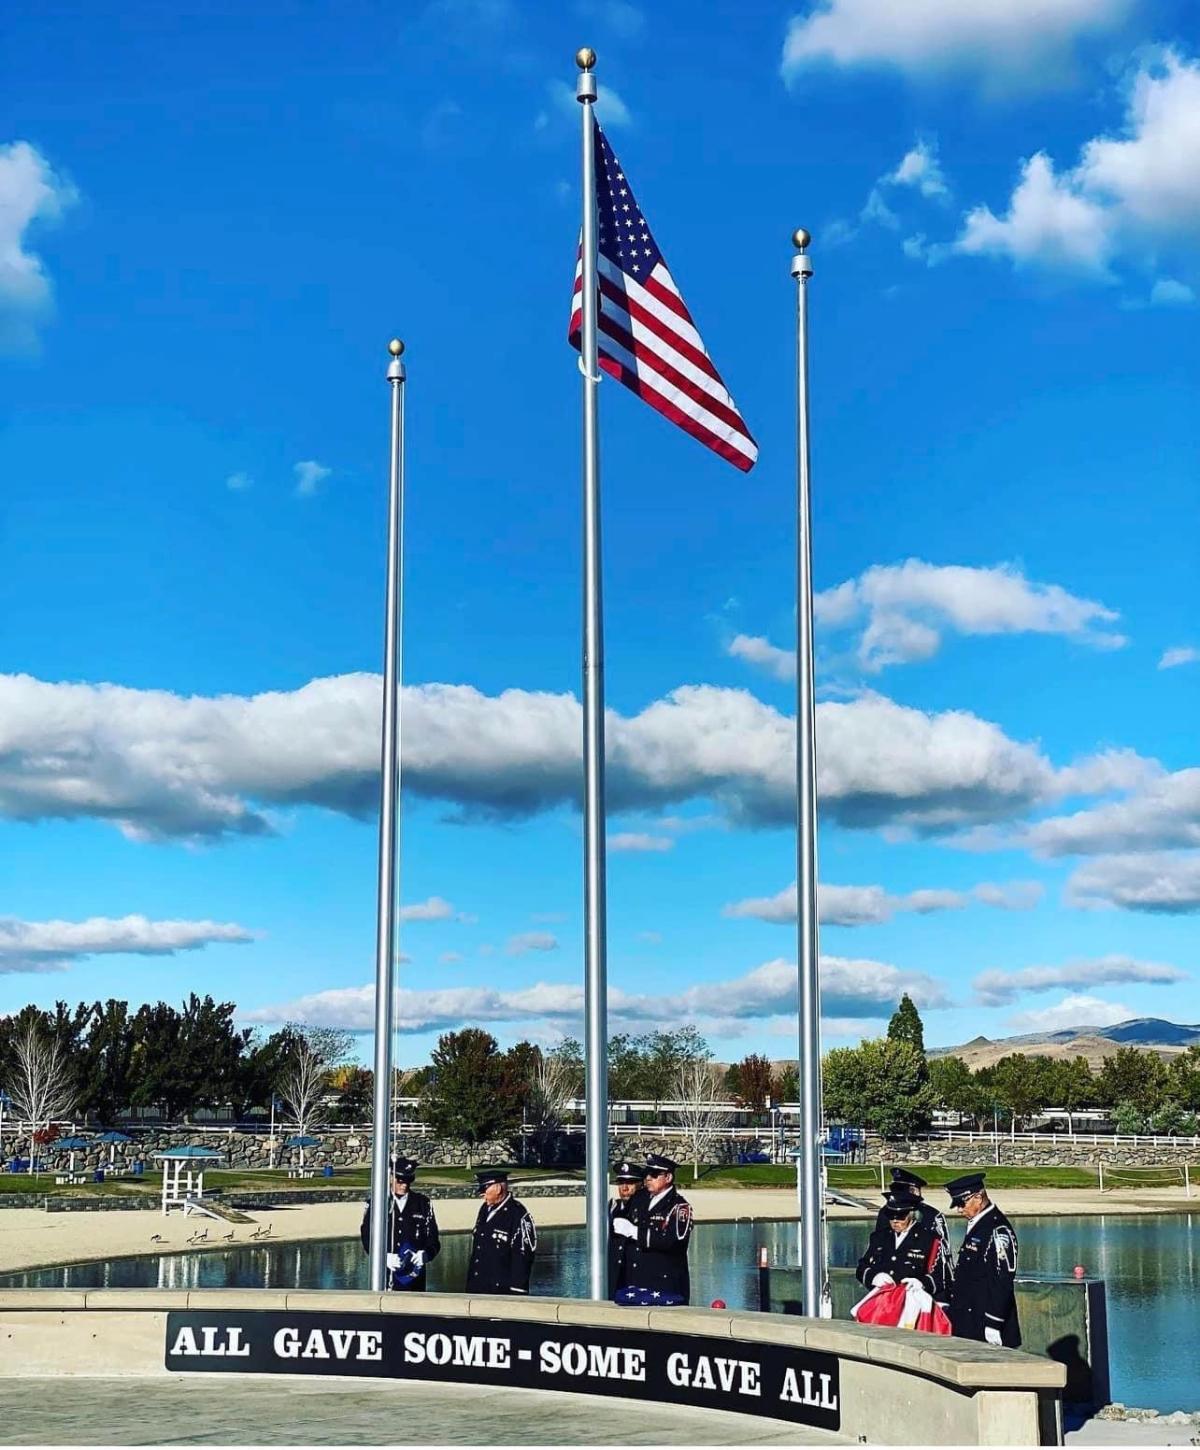 PacStates supports the veterans memorial